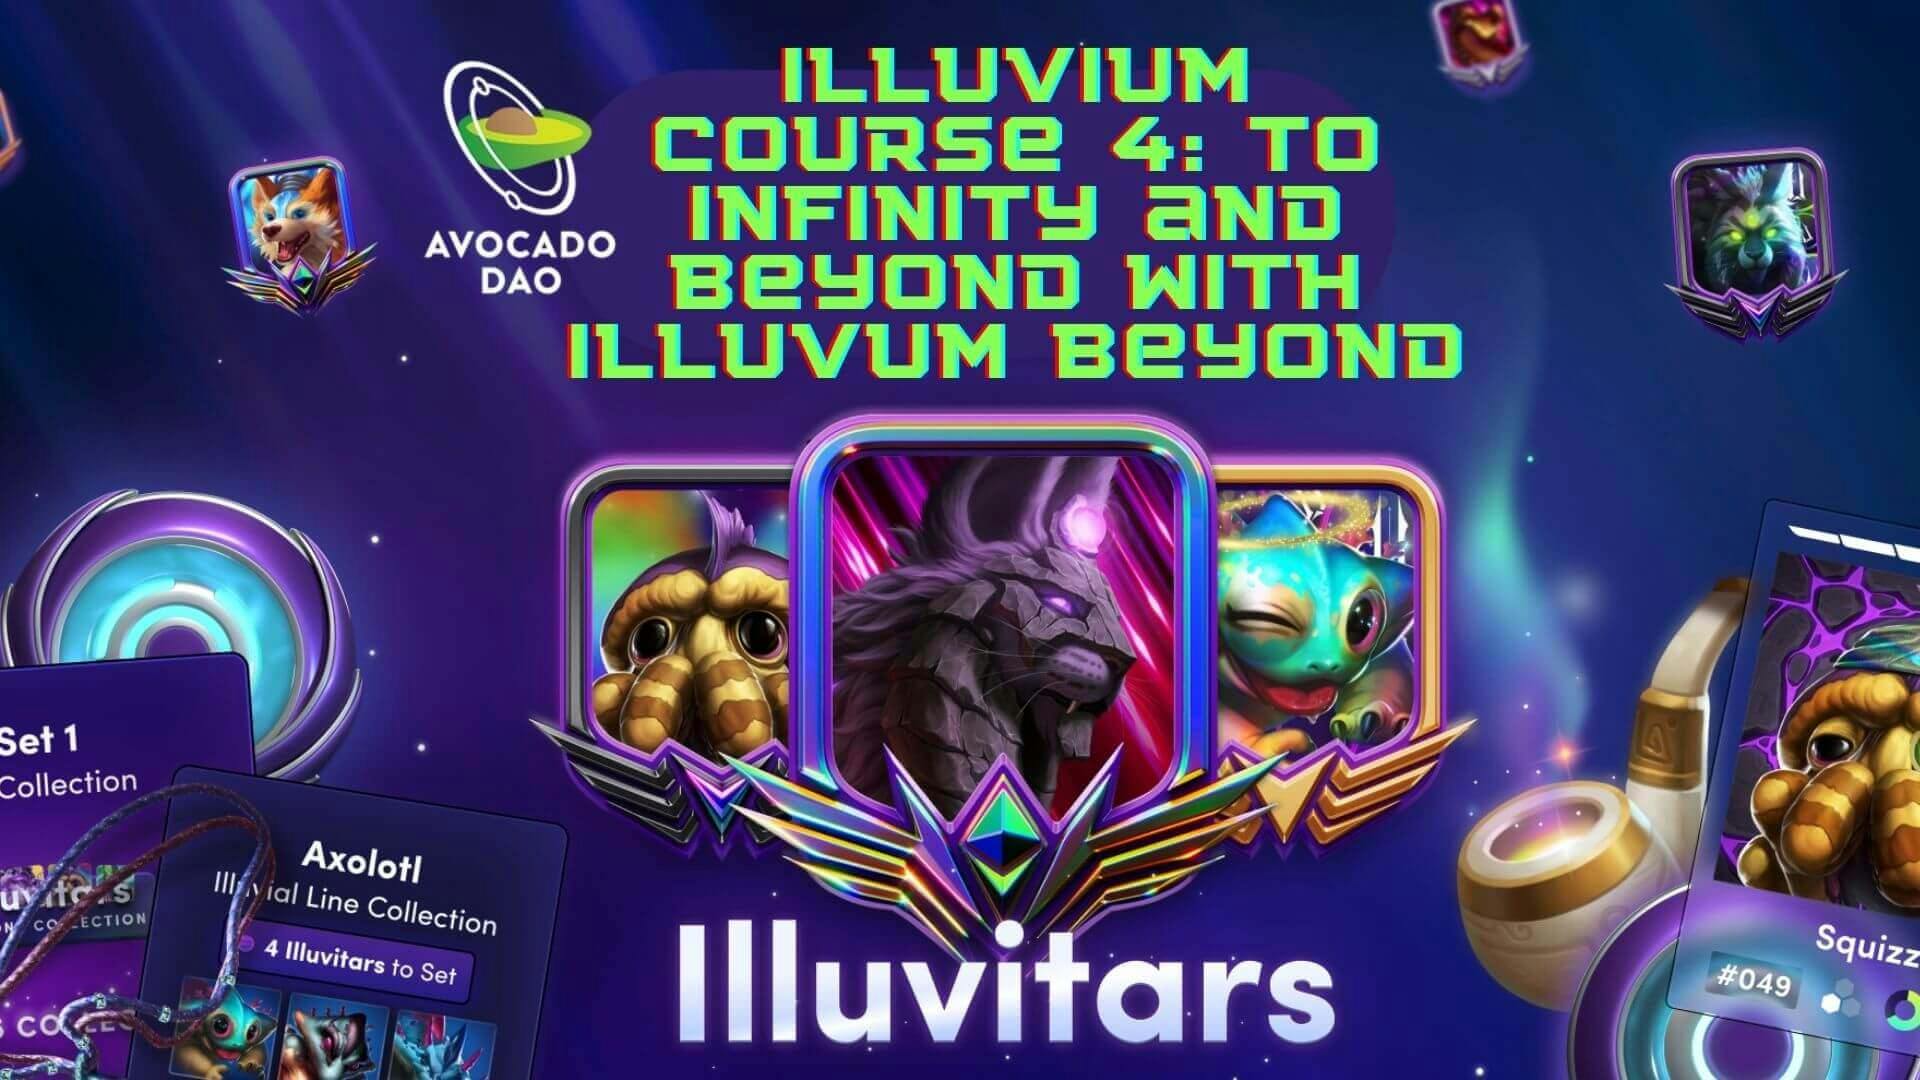 Illuvium Course 4: To Infinity and beyond with Illuvium Beyond